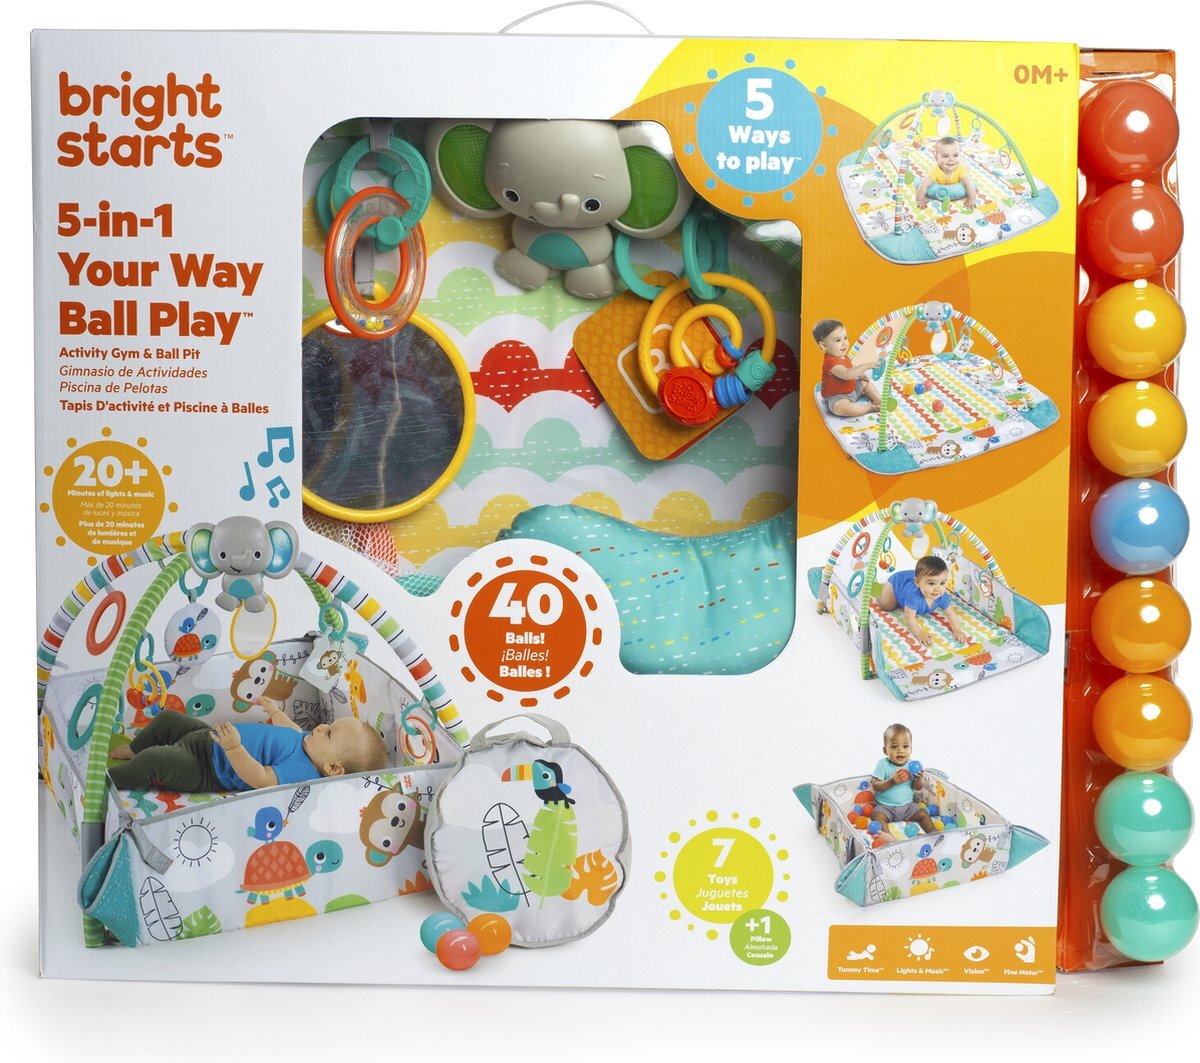 Bright Starts 5-in-1 Your Way Ball Play Activity Gym & Ball Pit - Volledig Tropisch